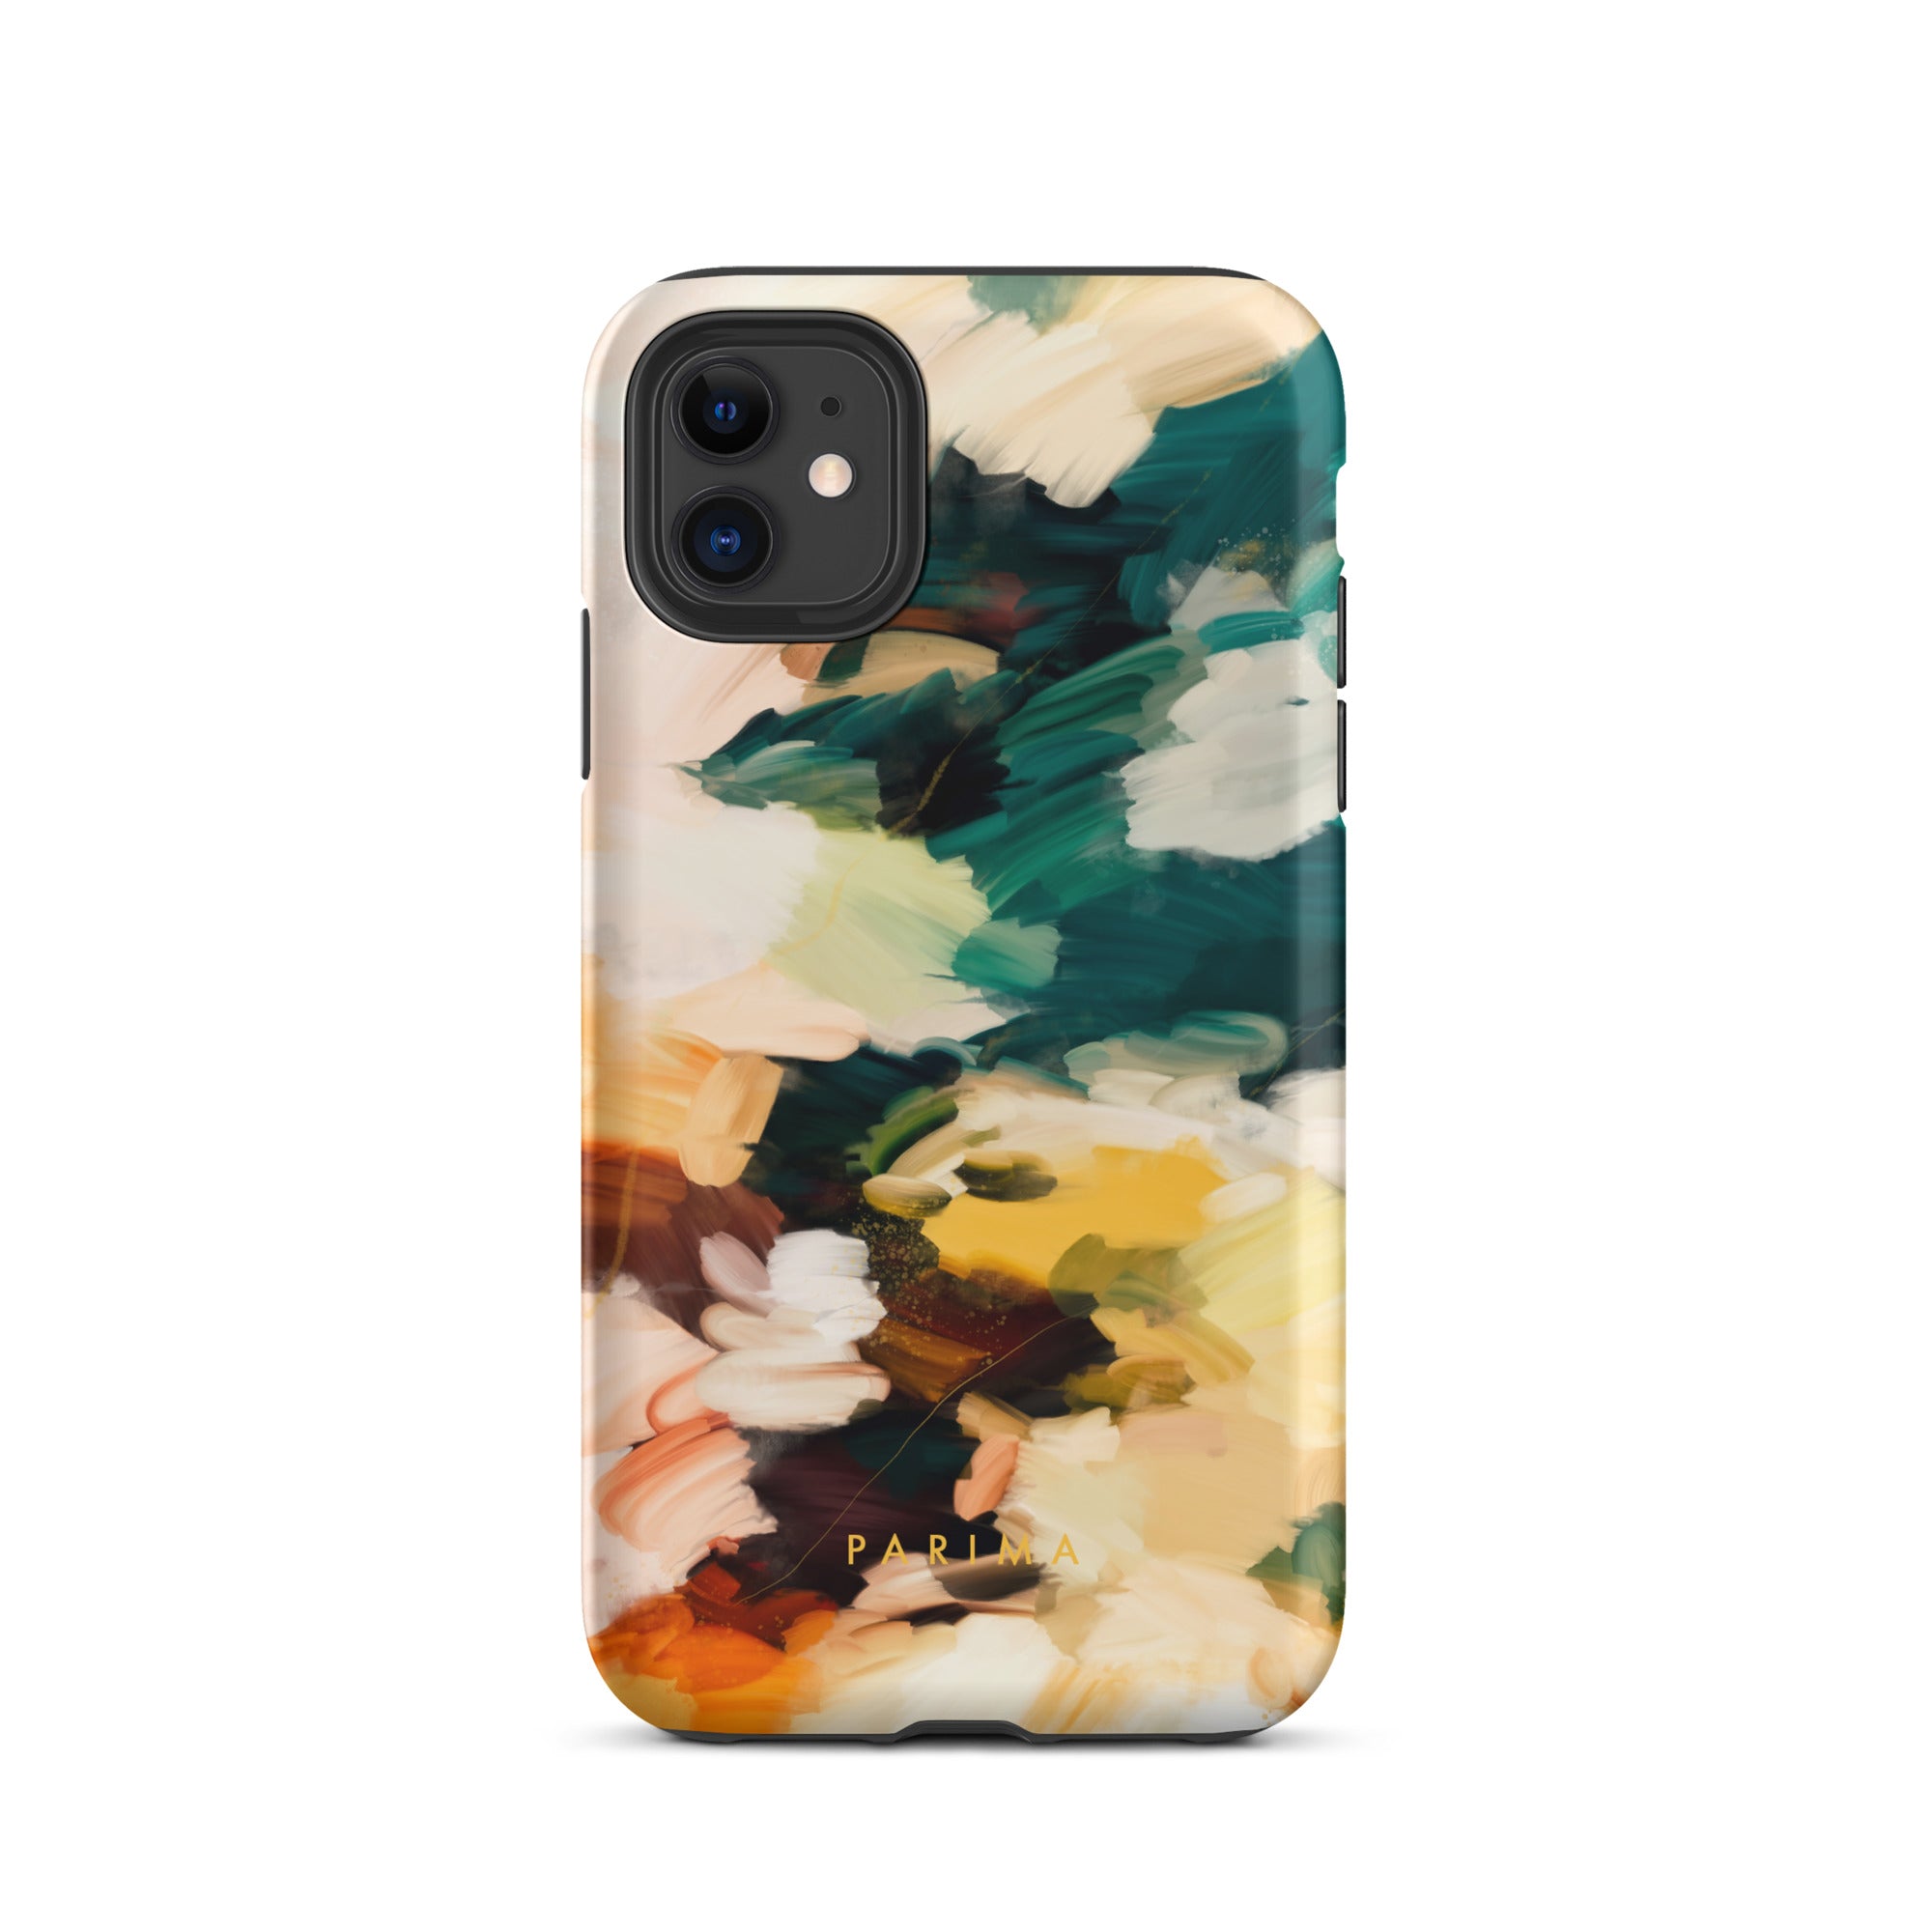 Cinque Terre, green and yellow abstract art - iPhone 11 tough case by Parima Studio